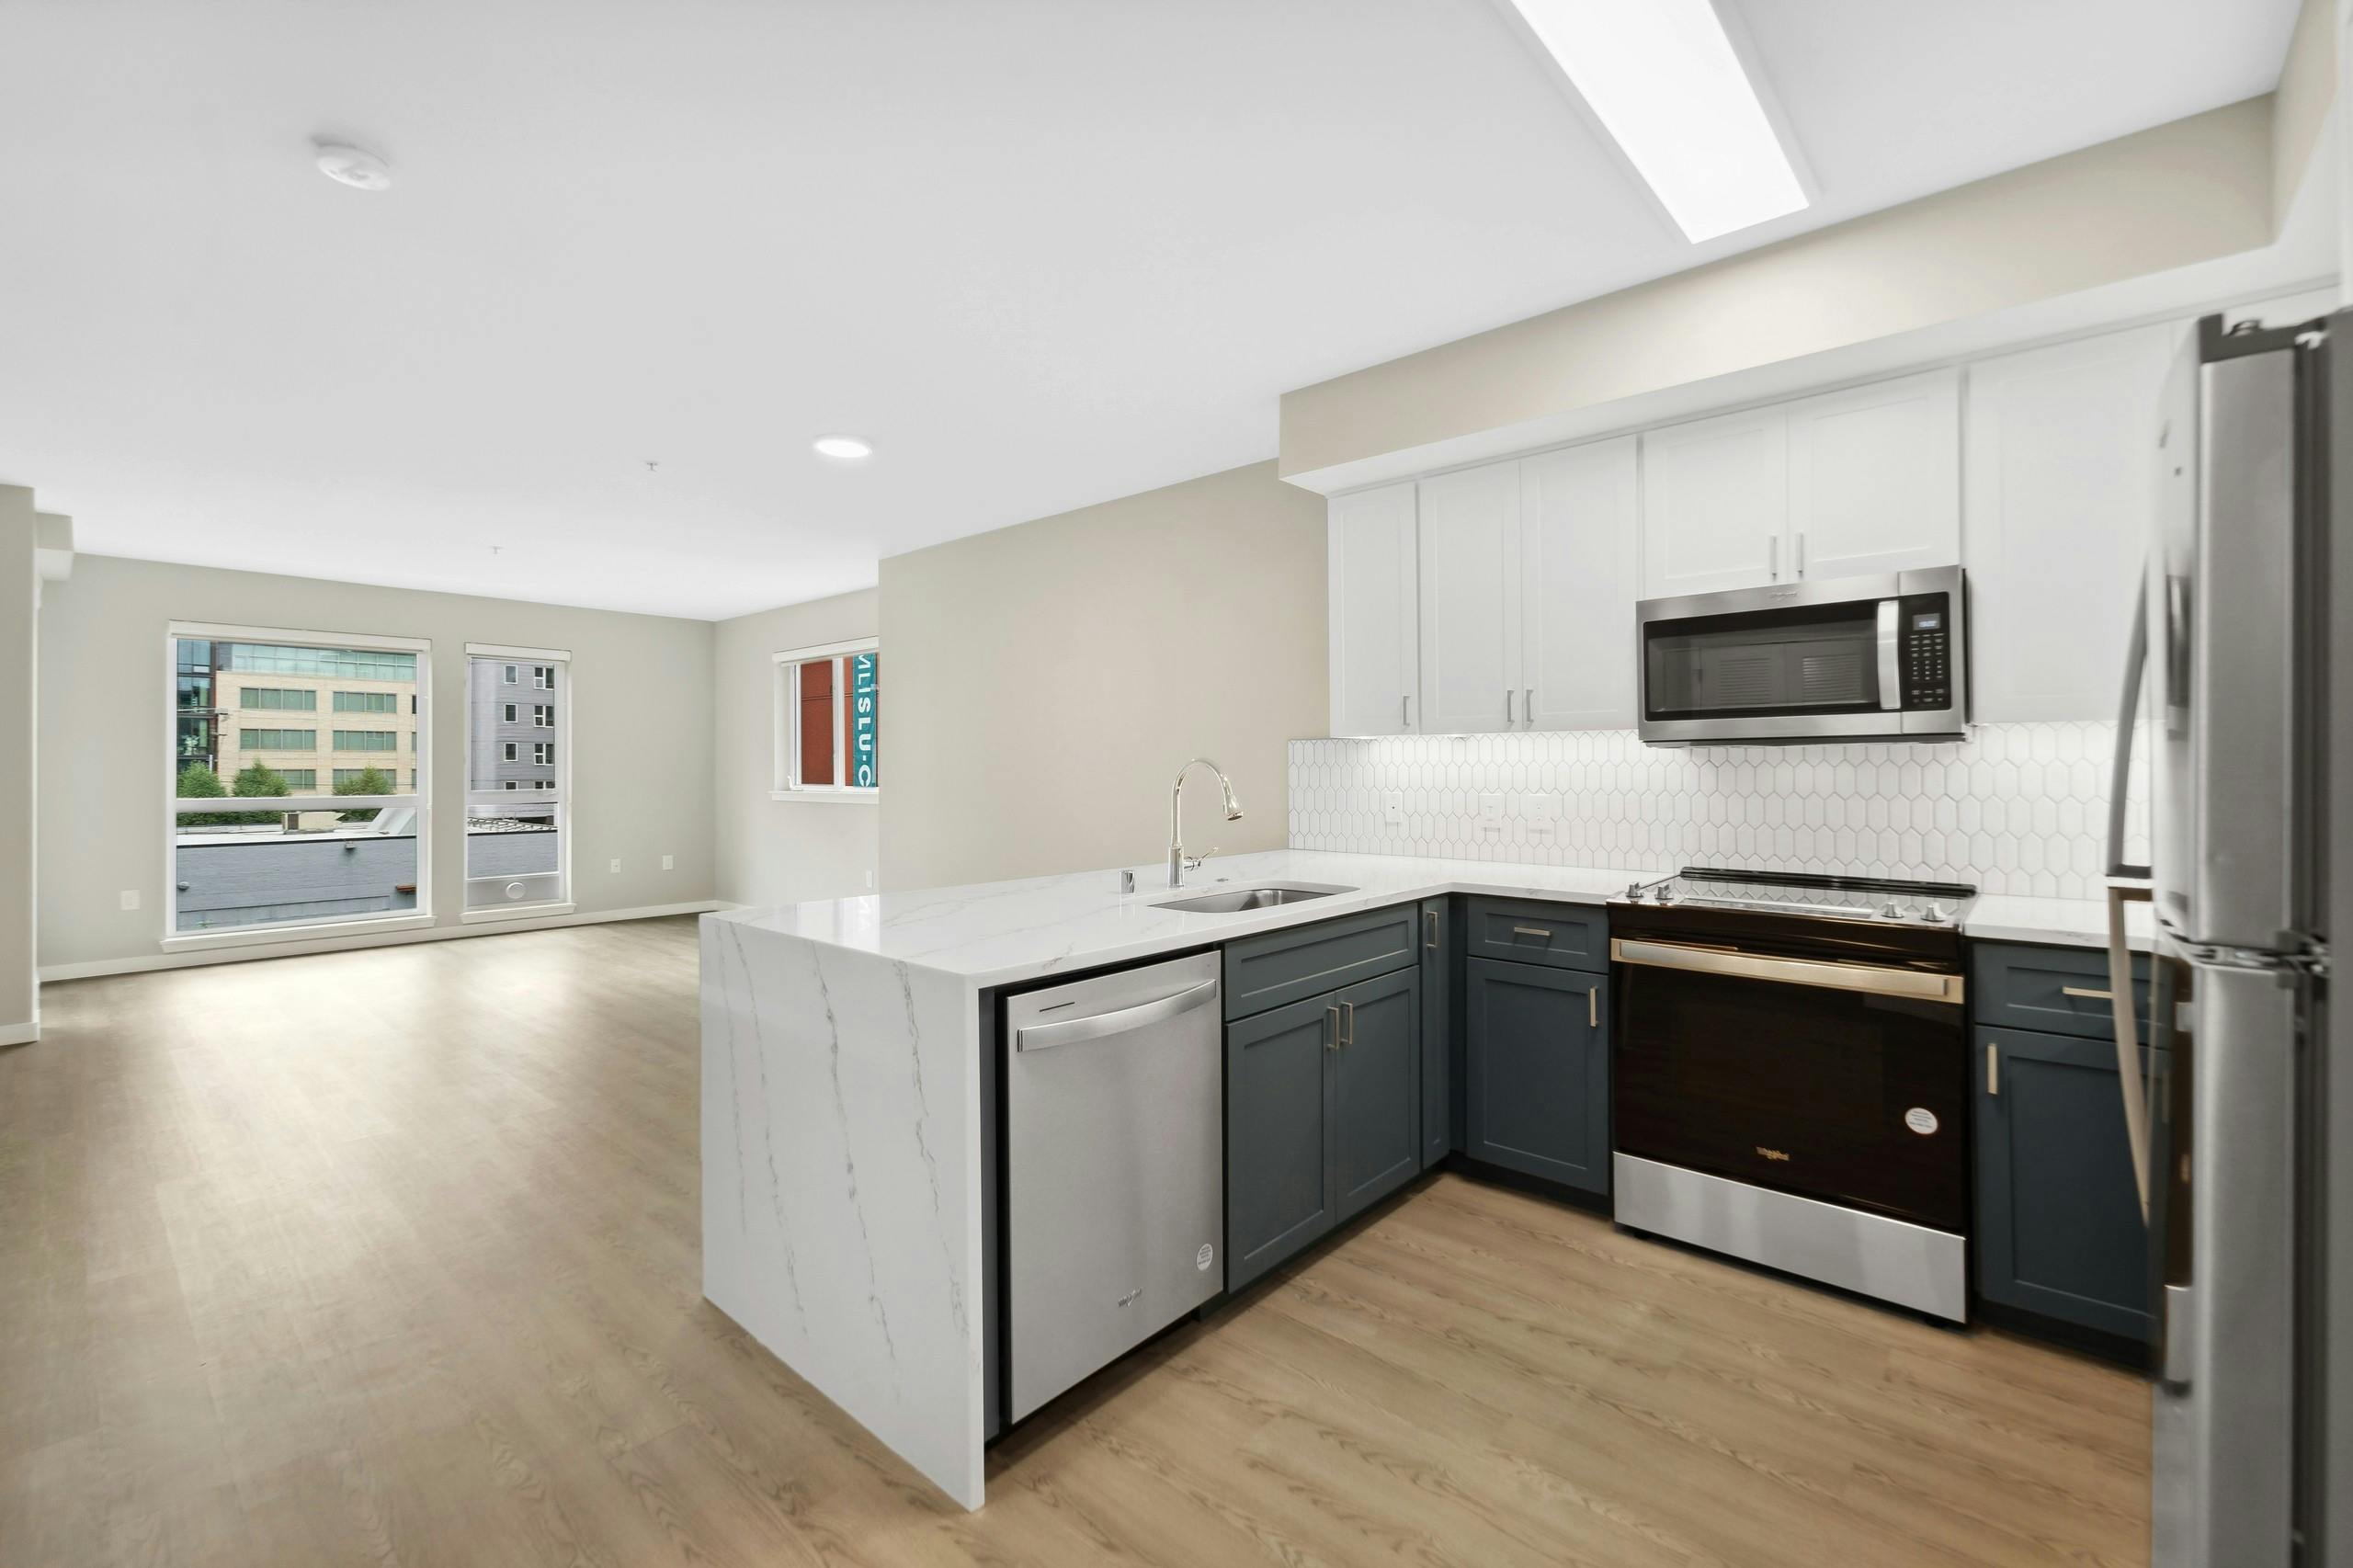 Kitchen at AMLI 535 with quartz countertop and stainless steel refrigerator and a view into living room with plank flooring